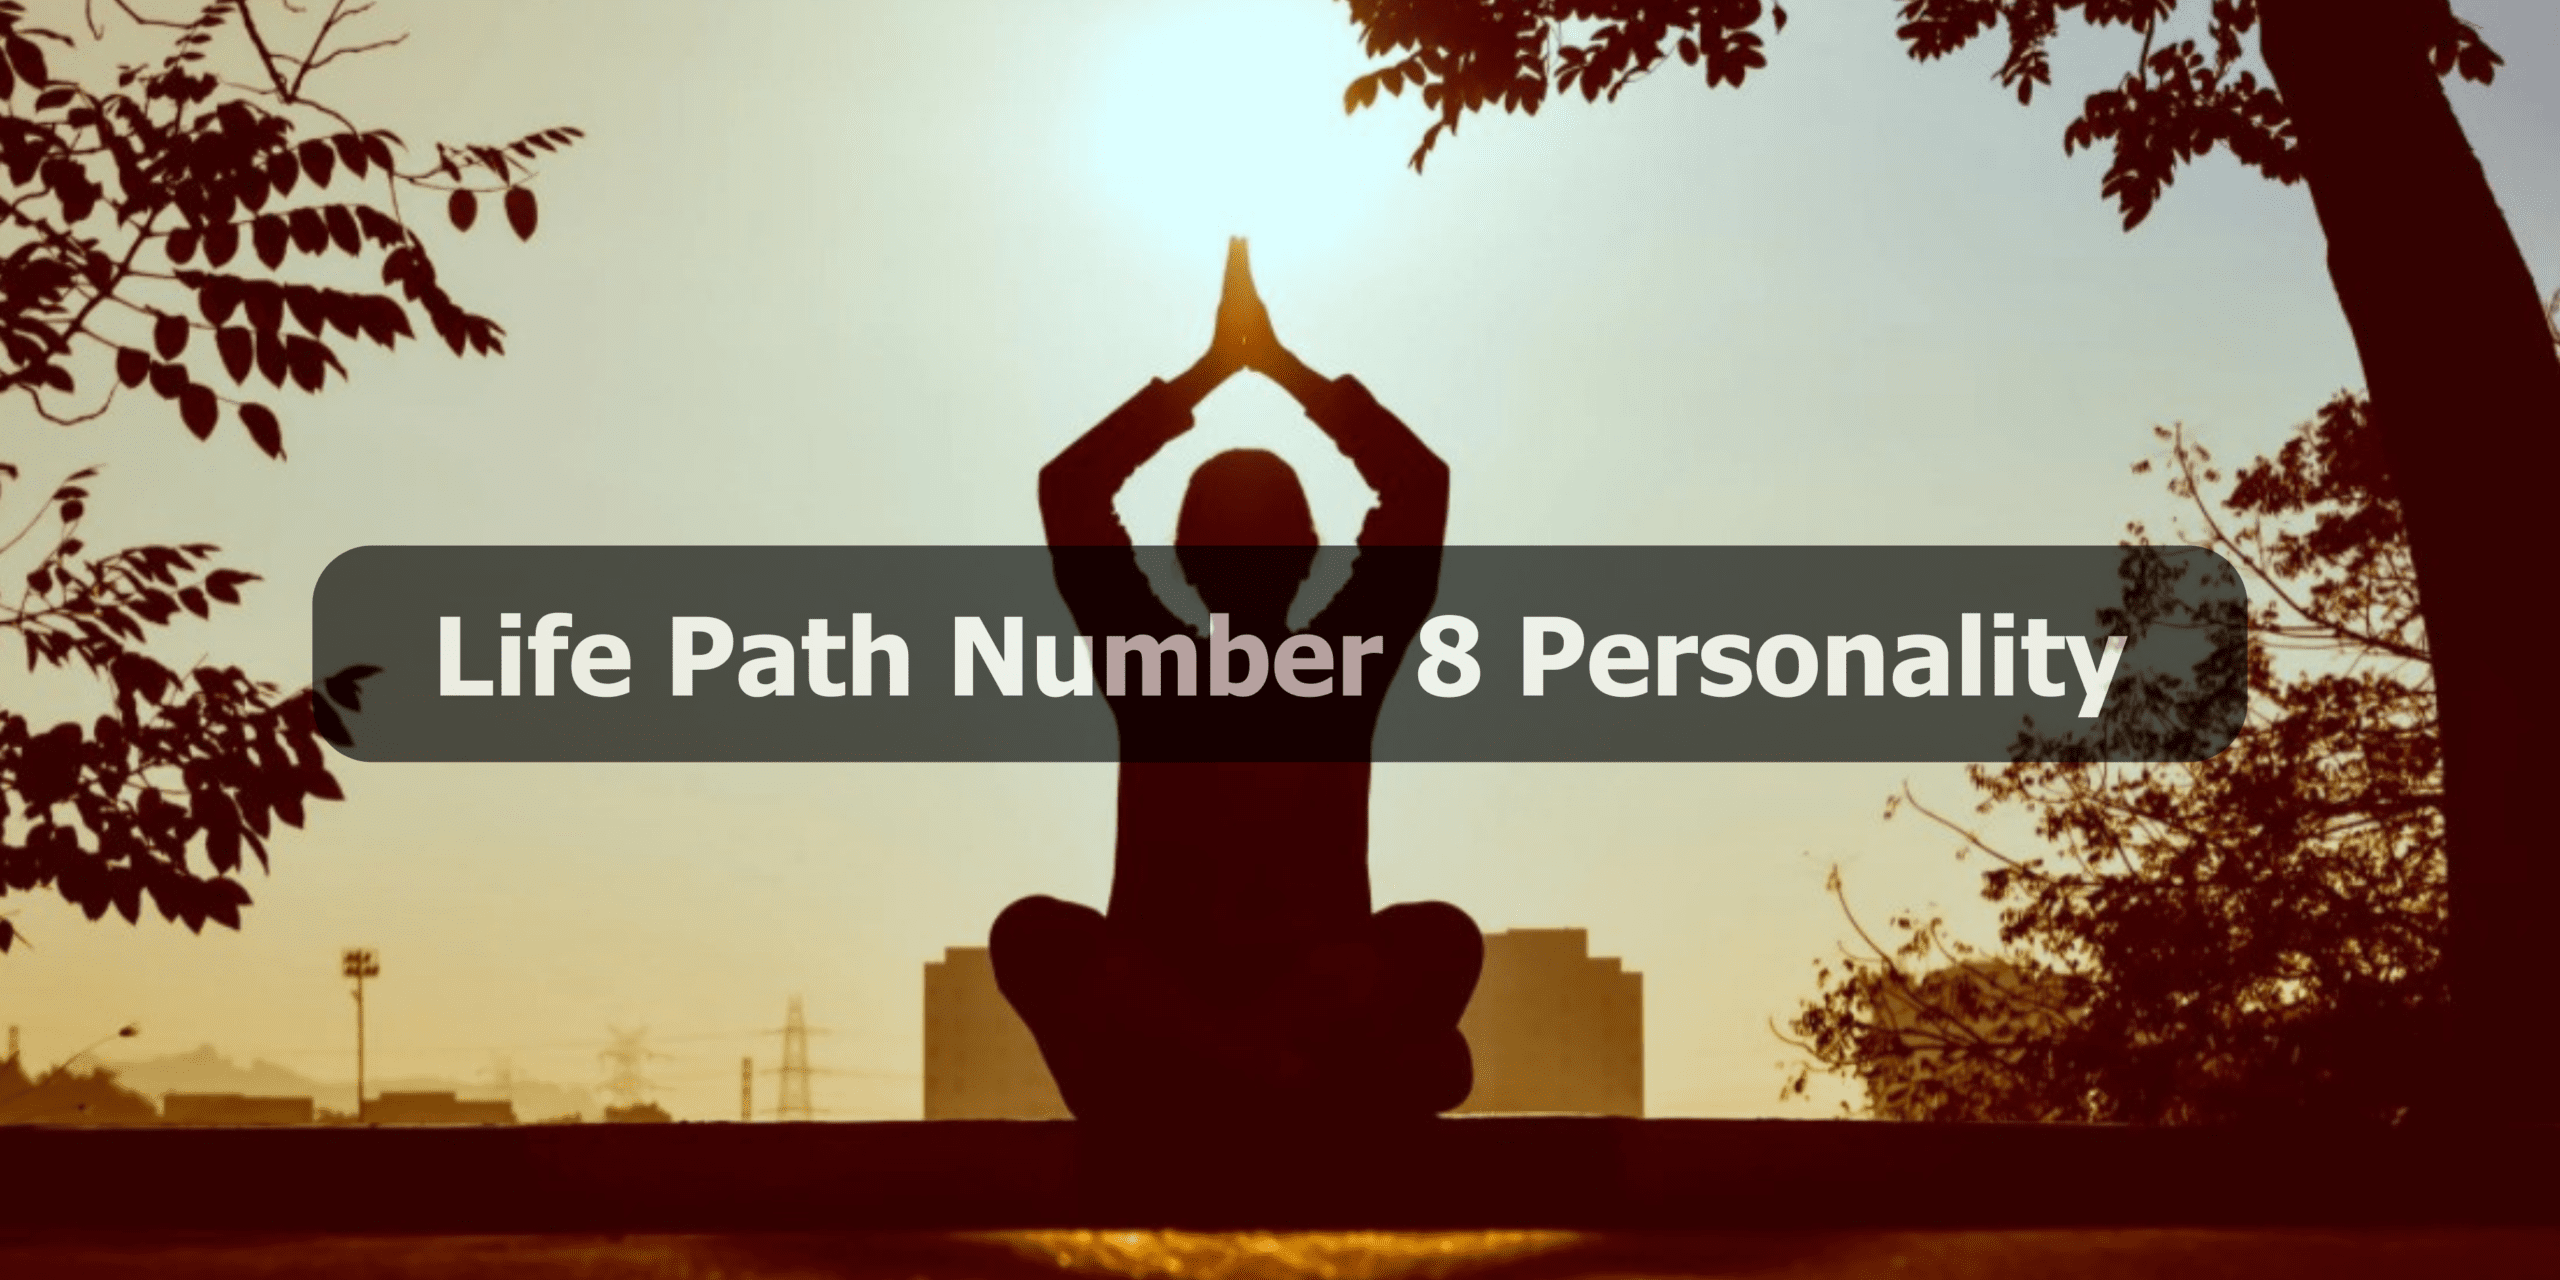 Life Path Number 8 Personality